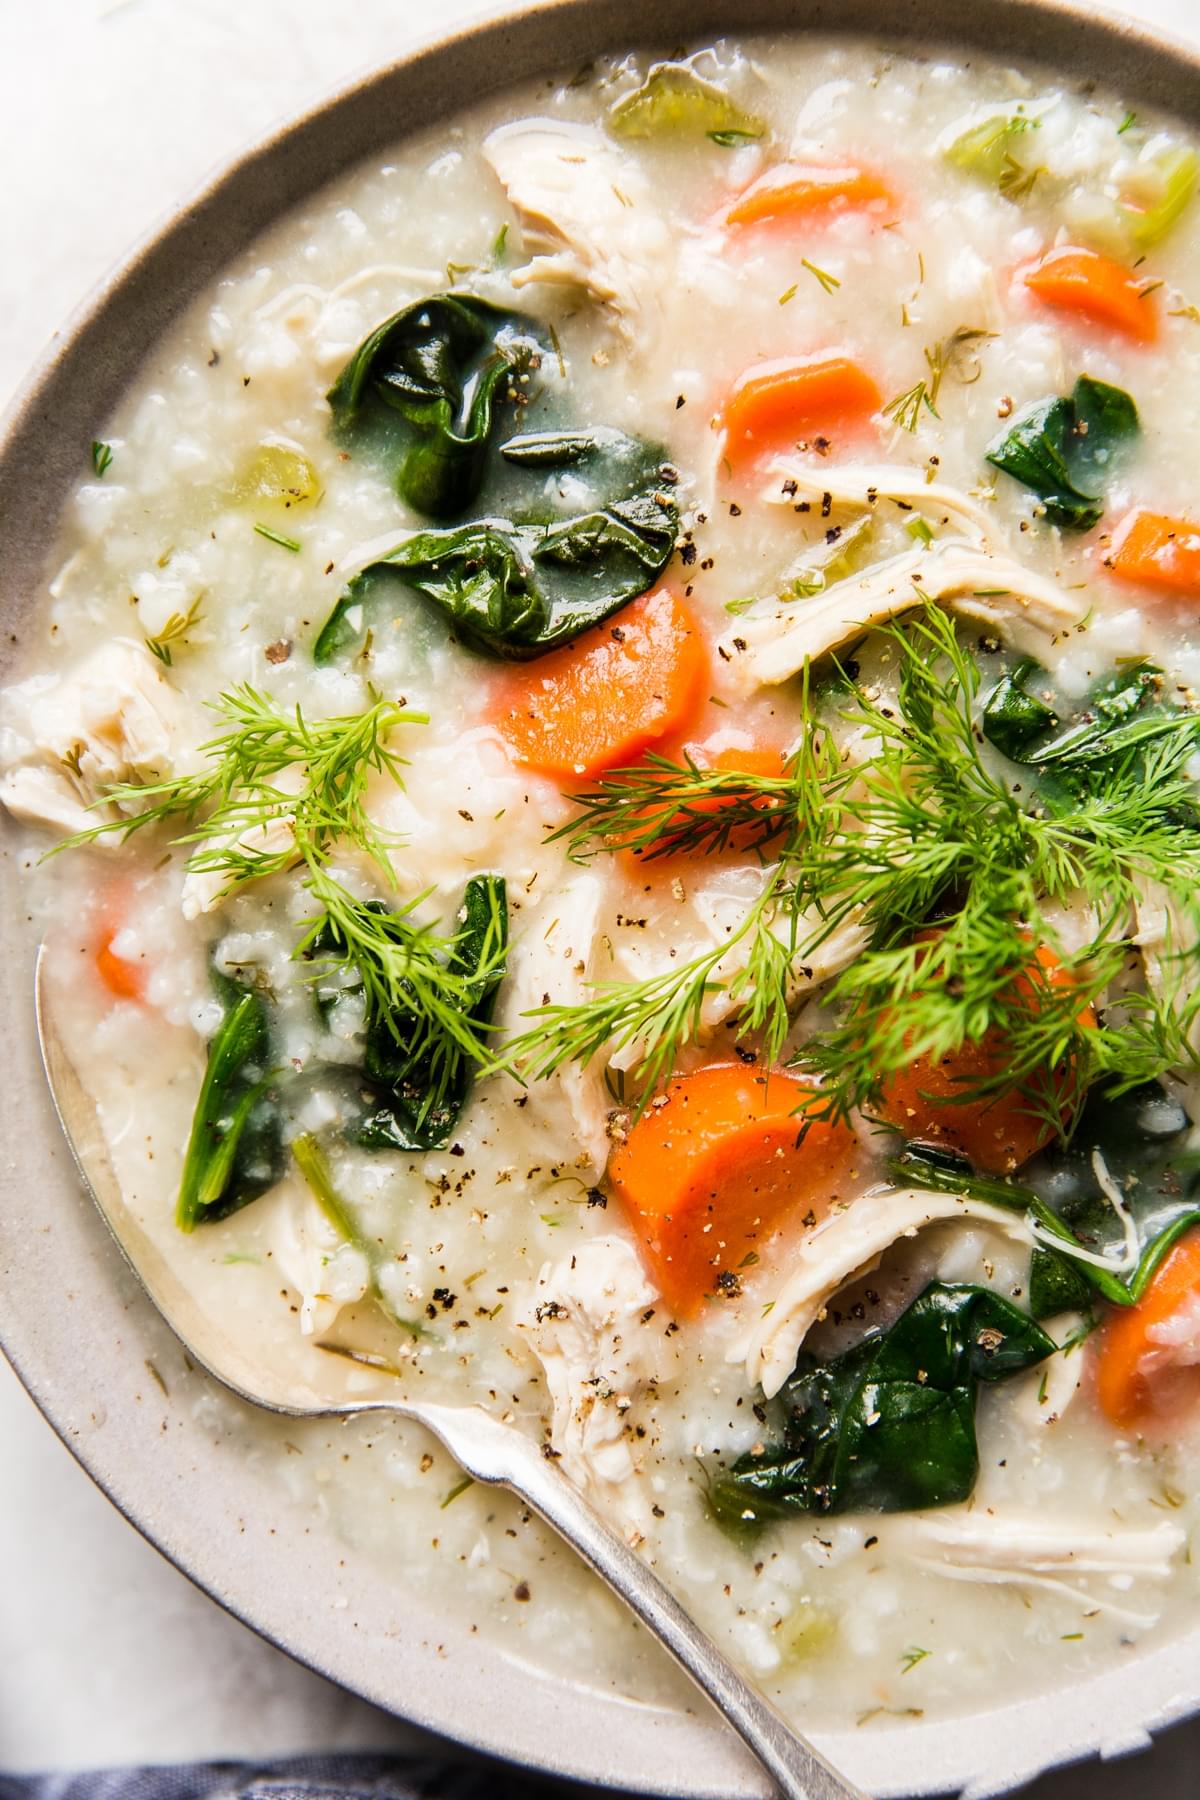 Chicken and rice soup with carrots, spinach, dill and lemon